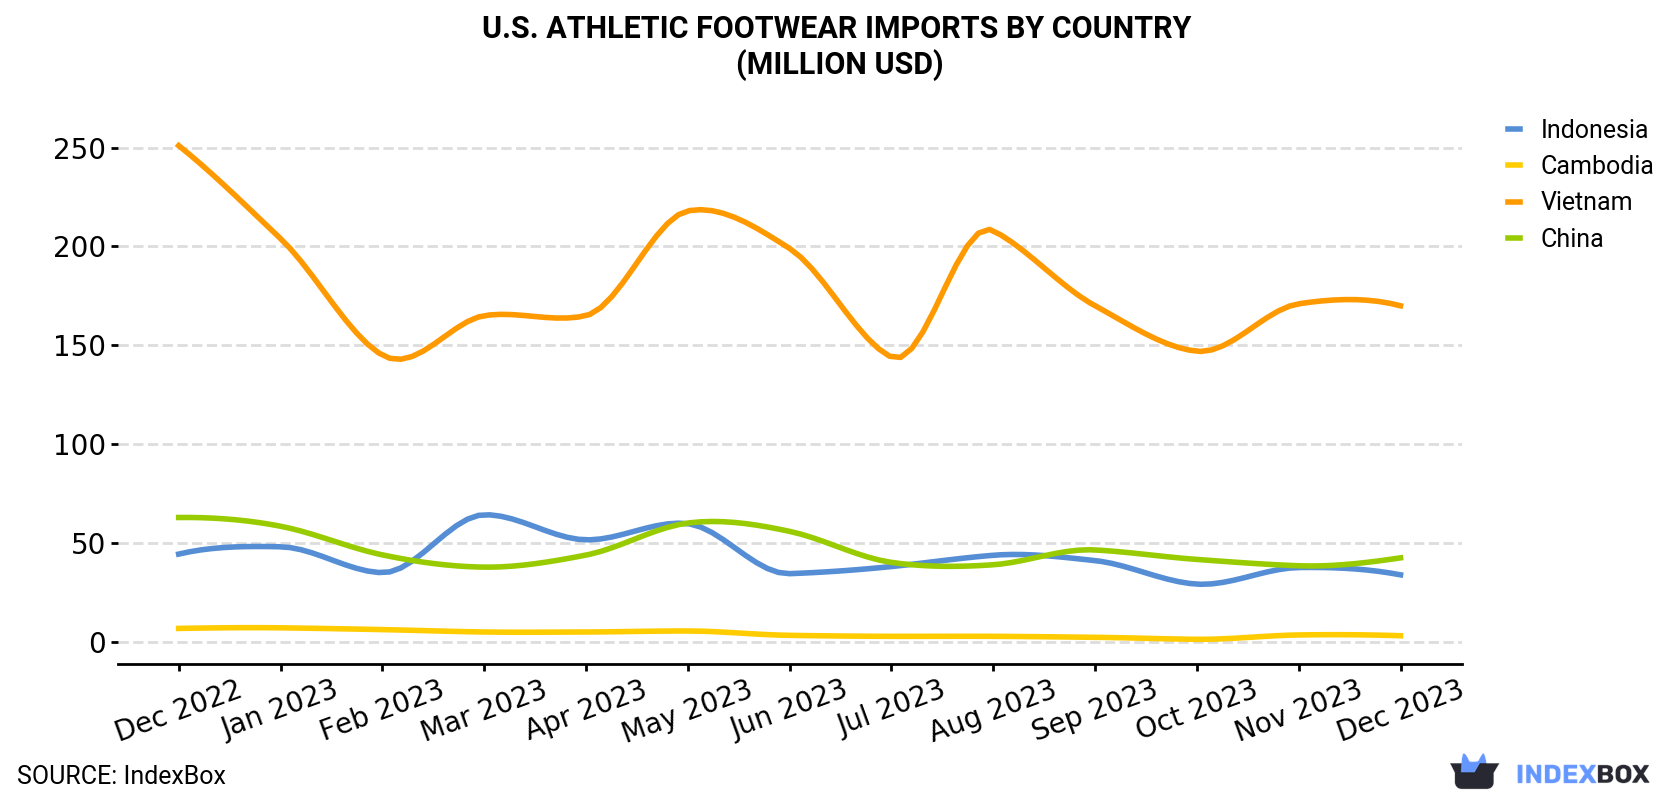 U.S. Athletic Footwear Imports By Country (Million USD)